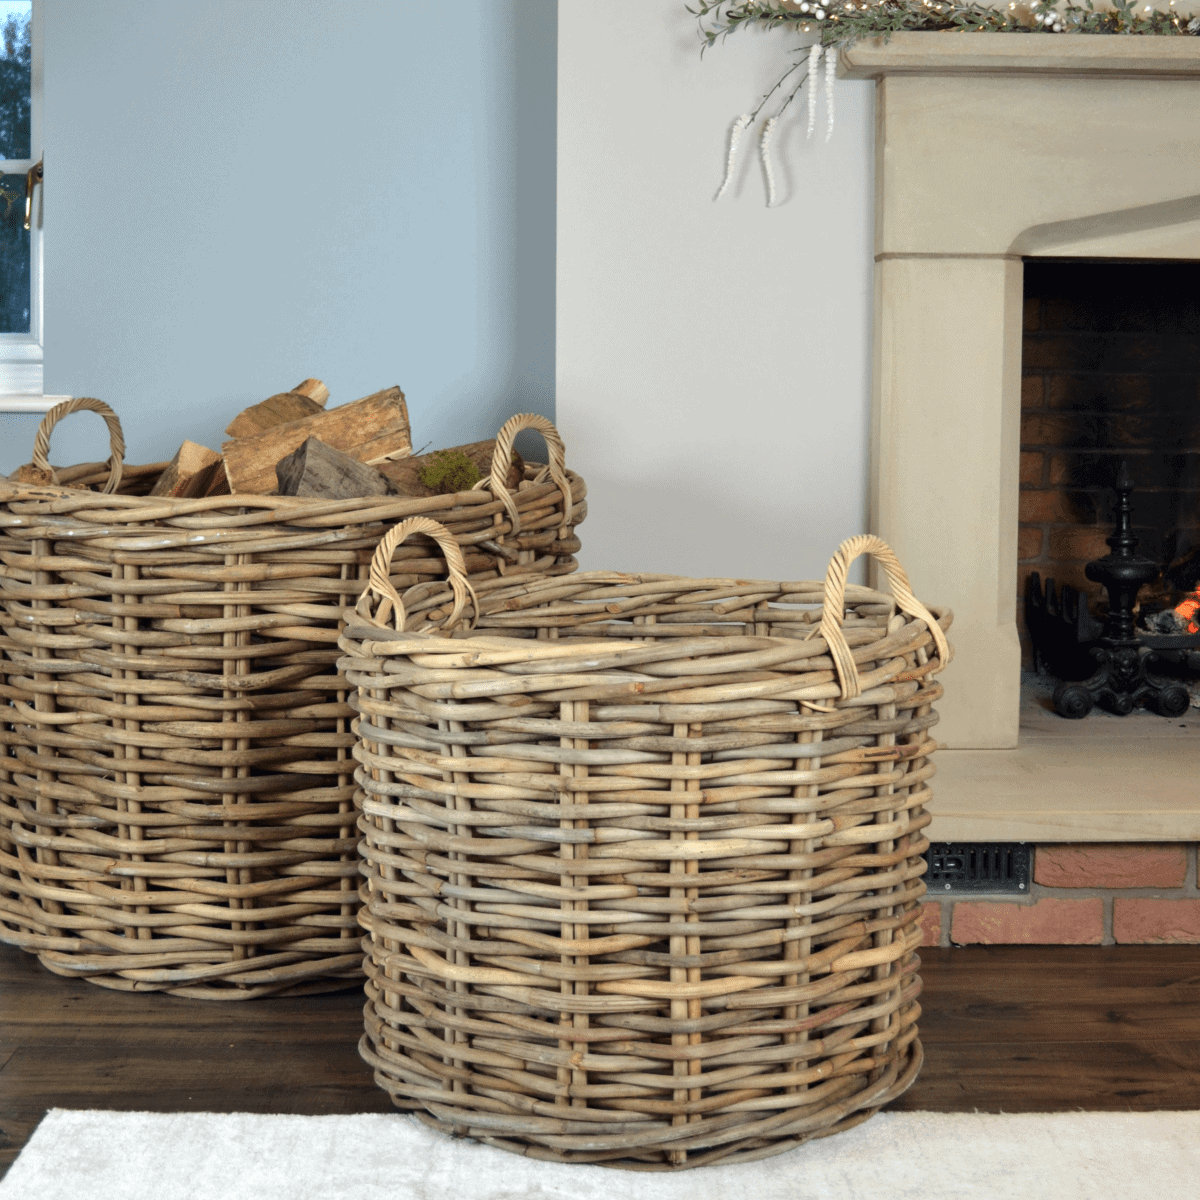 2 large rattan log baskets in front of fire, one filled with logs.